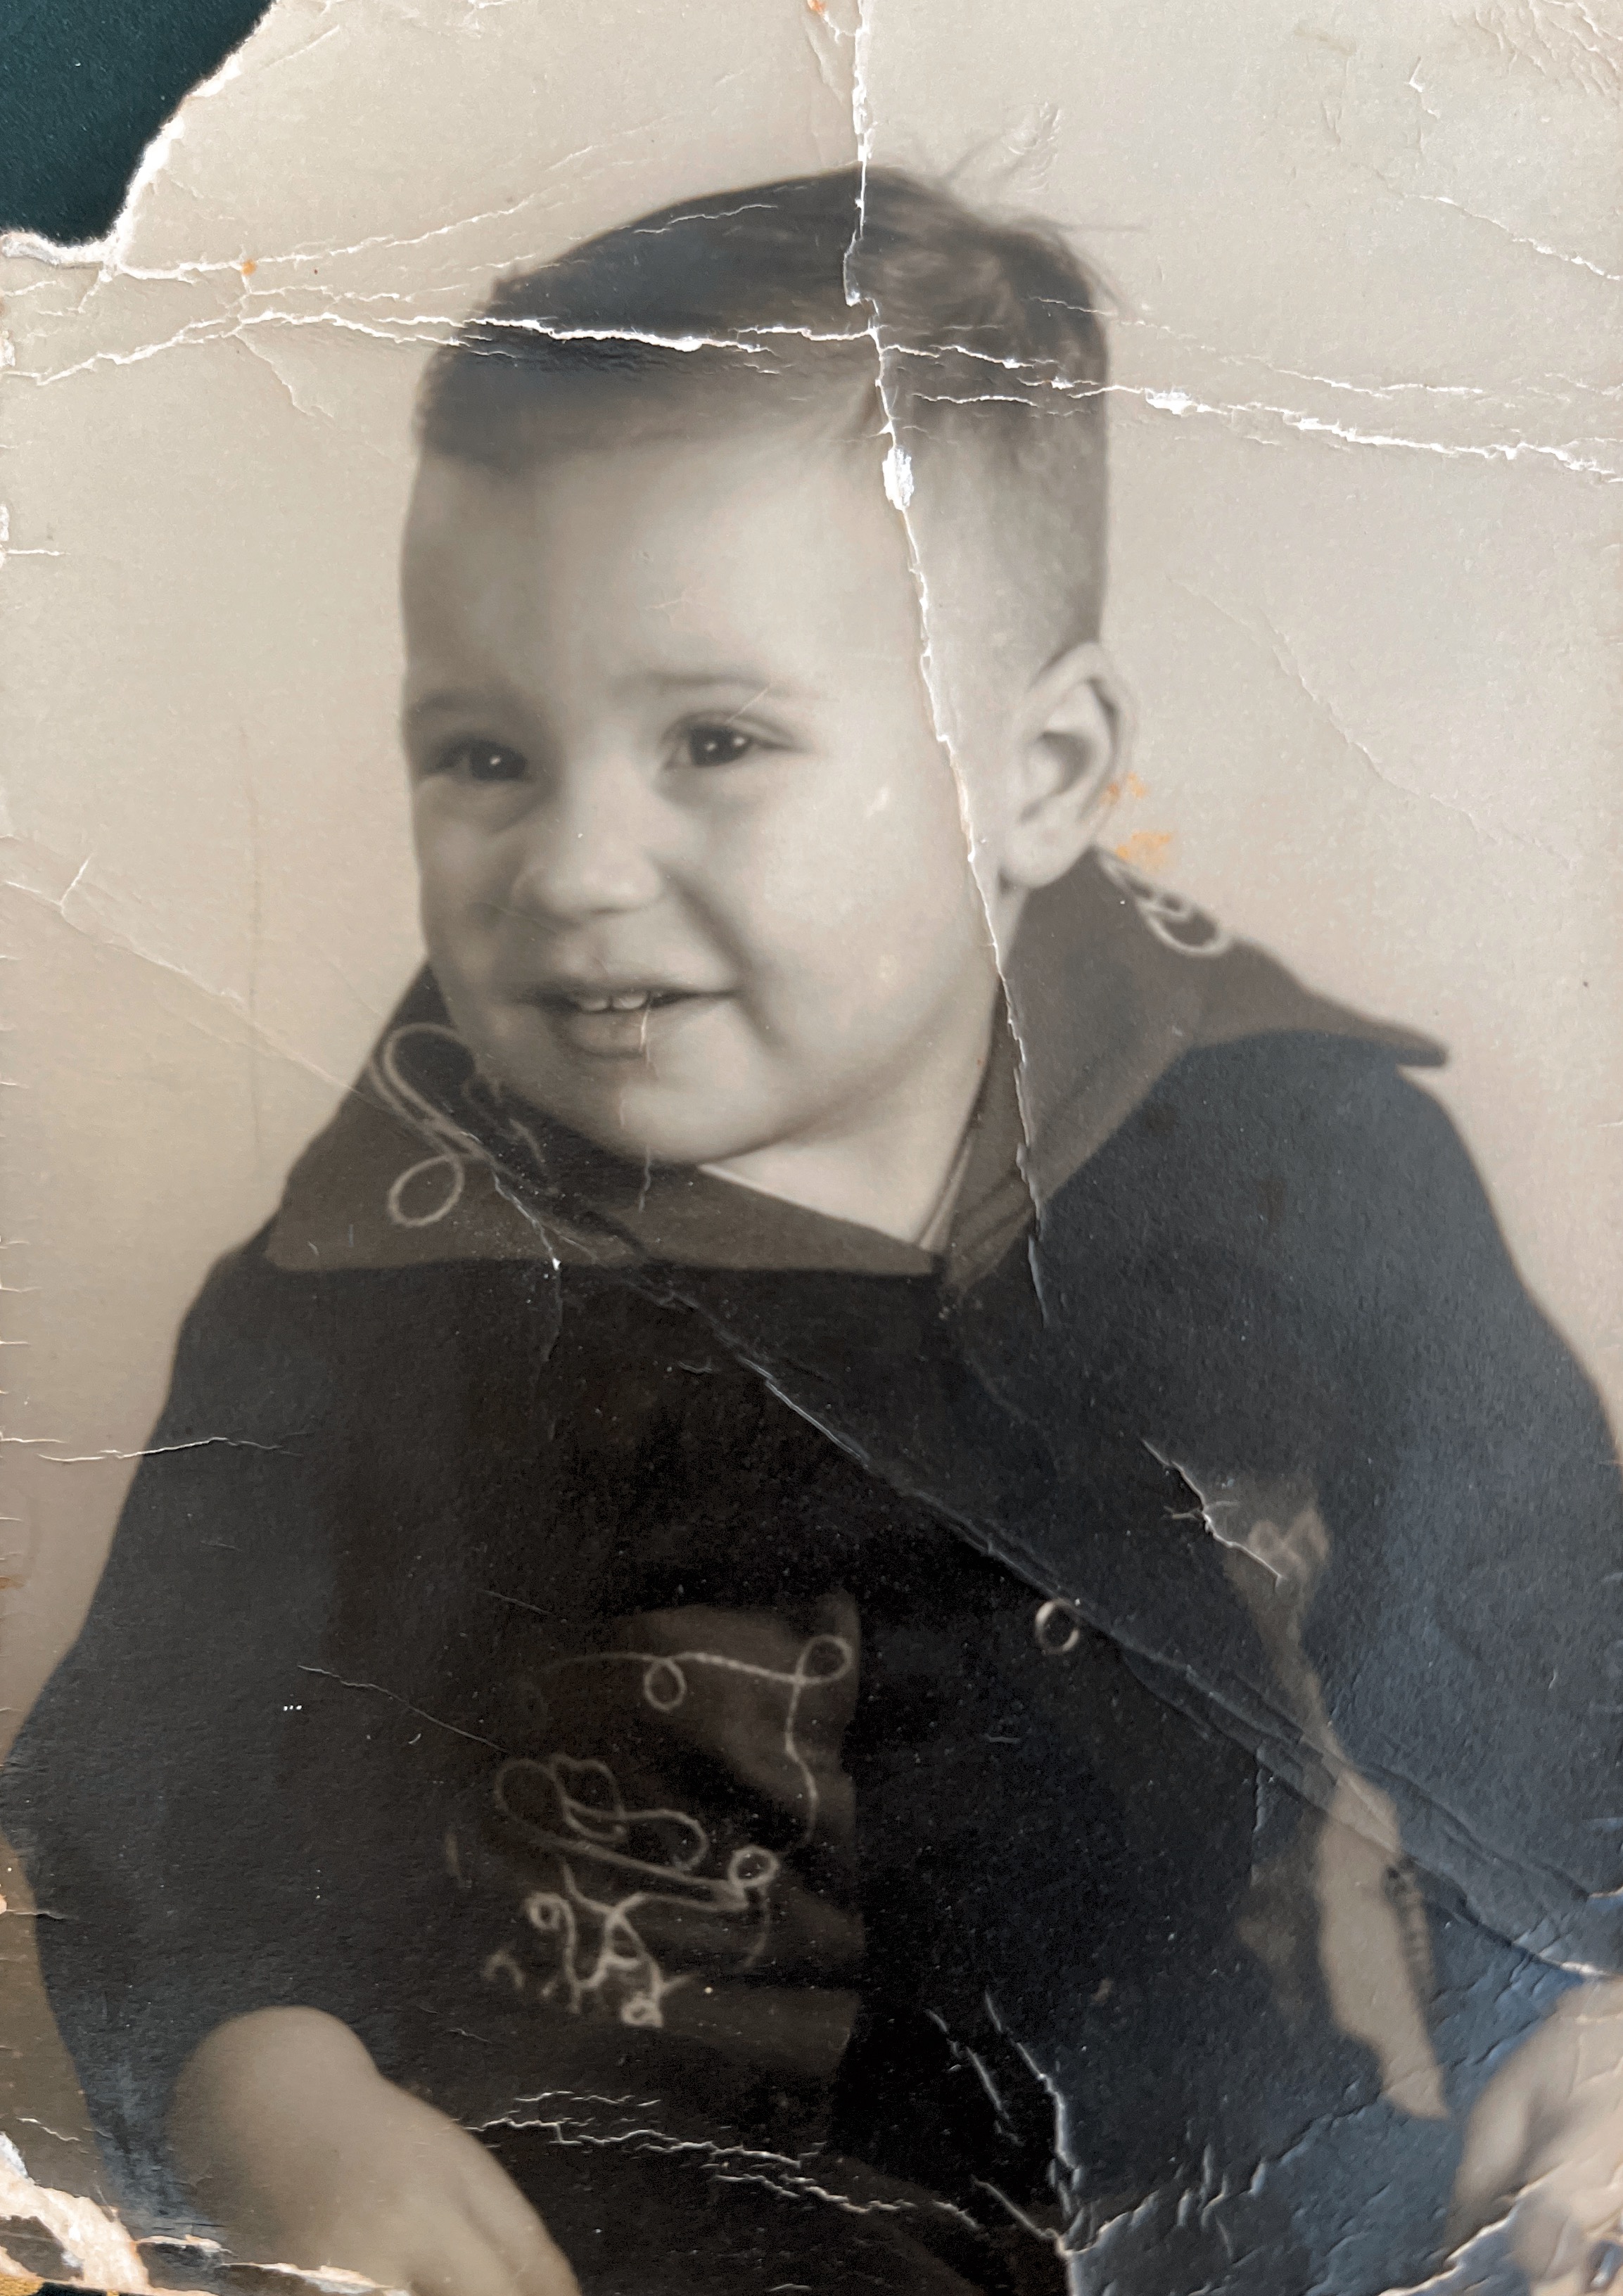 Billy at 18 months old. 1957